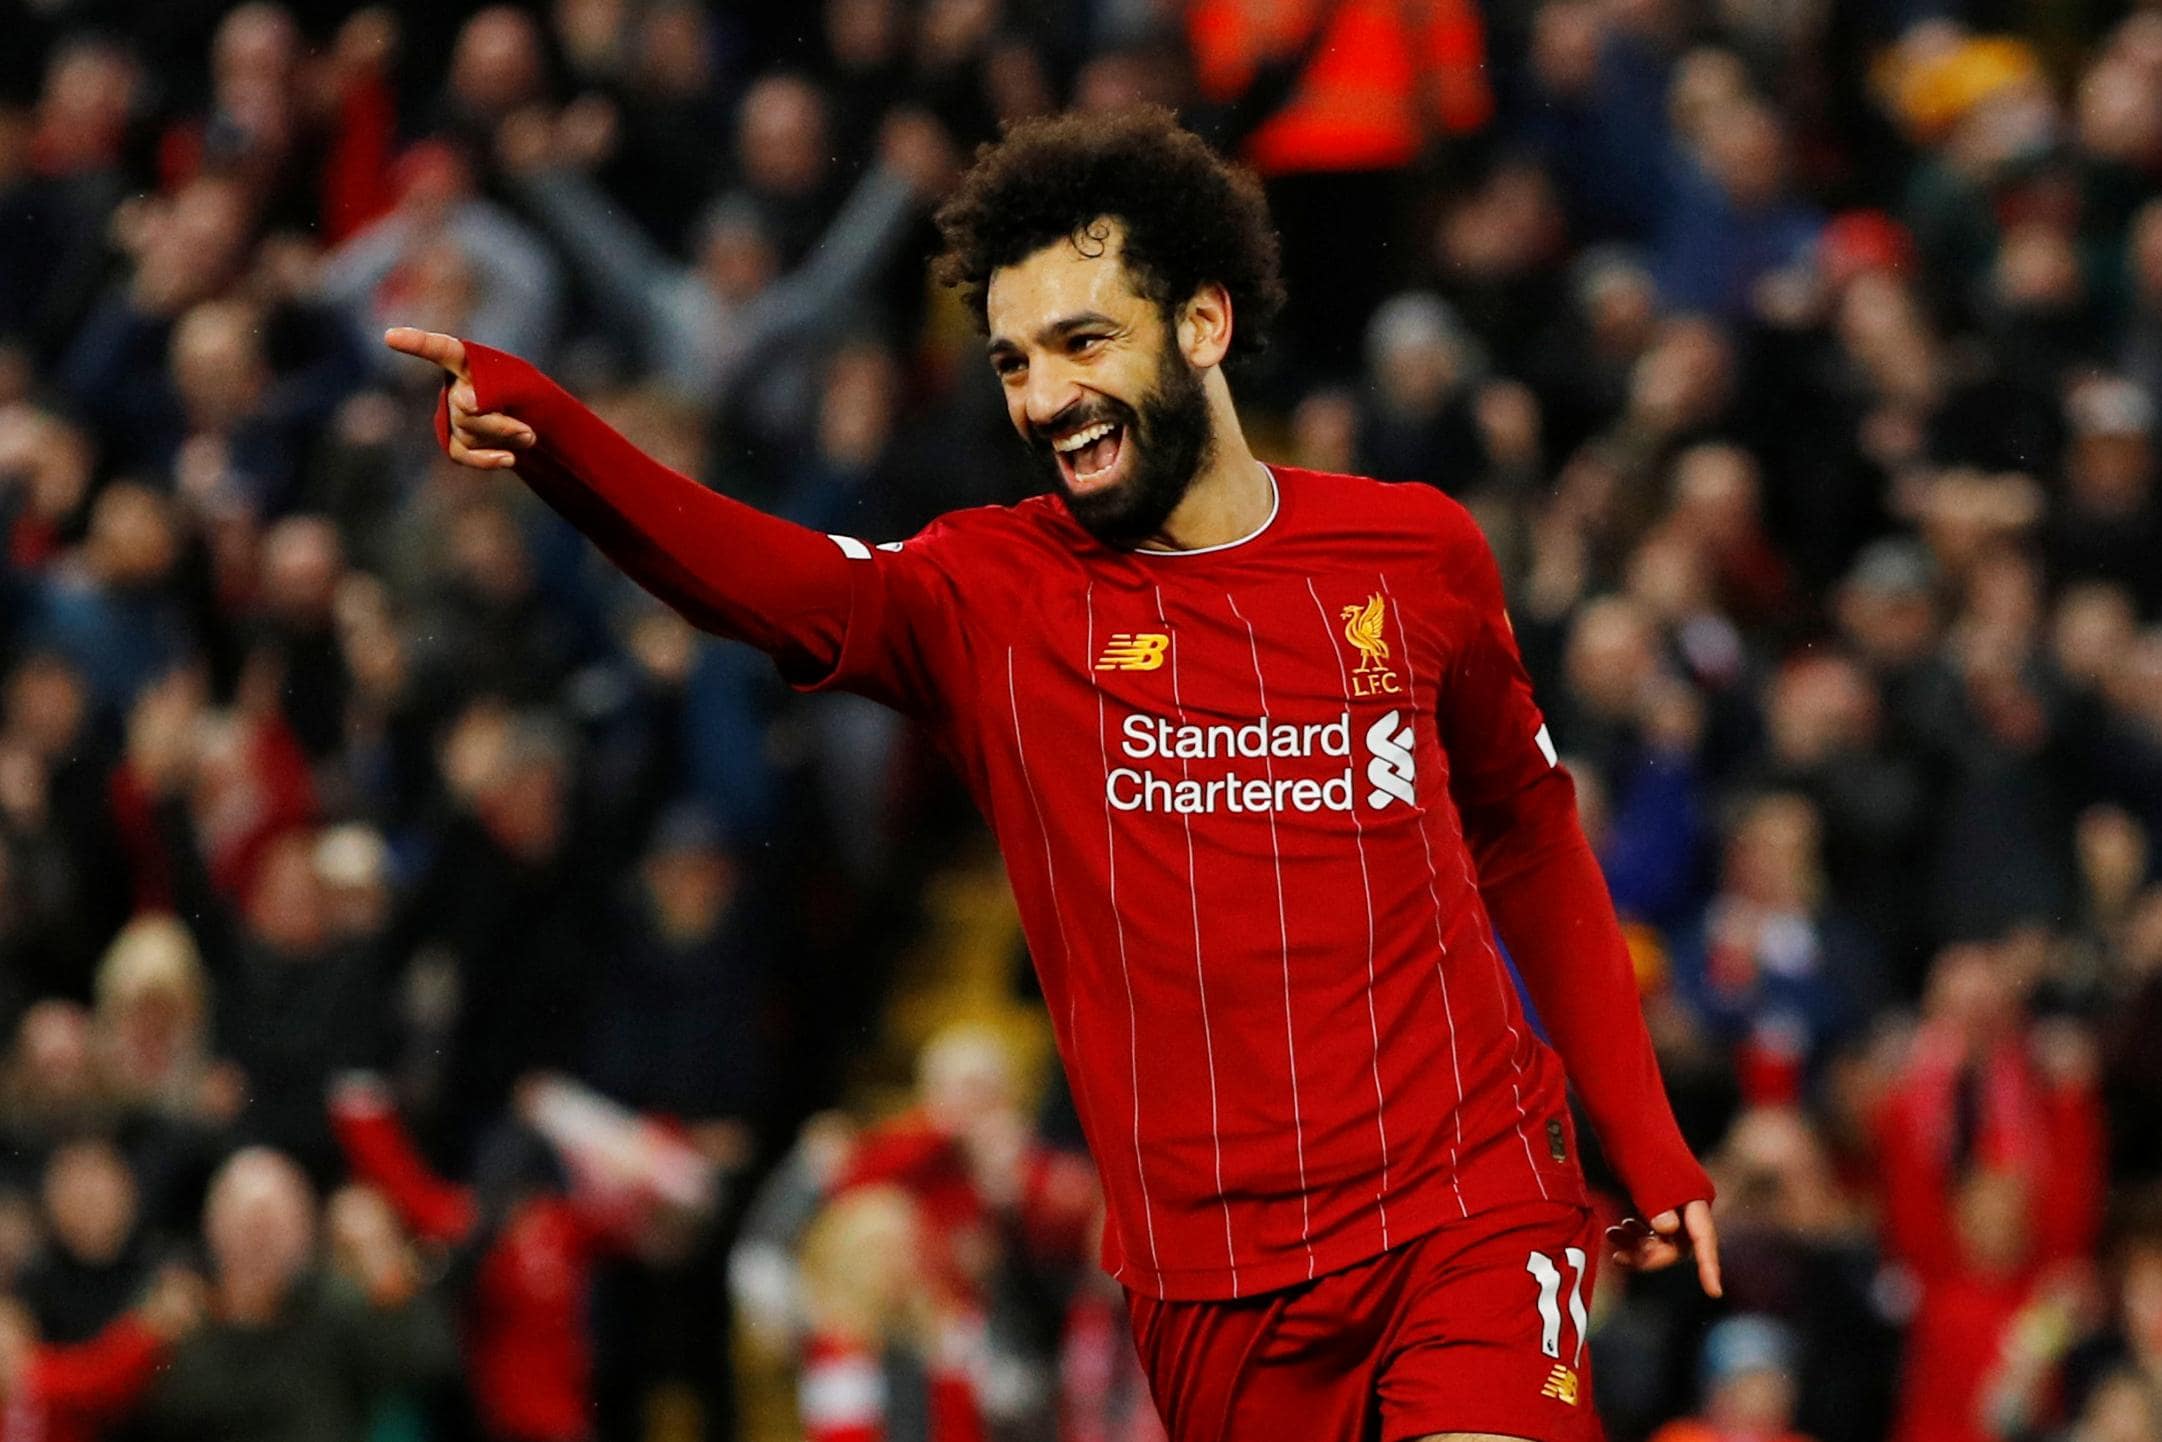 Mohamed Salah tested positive for Covid-19, confirmed by the Egyptian